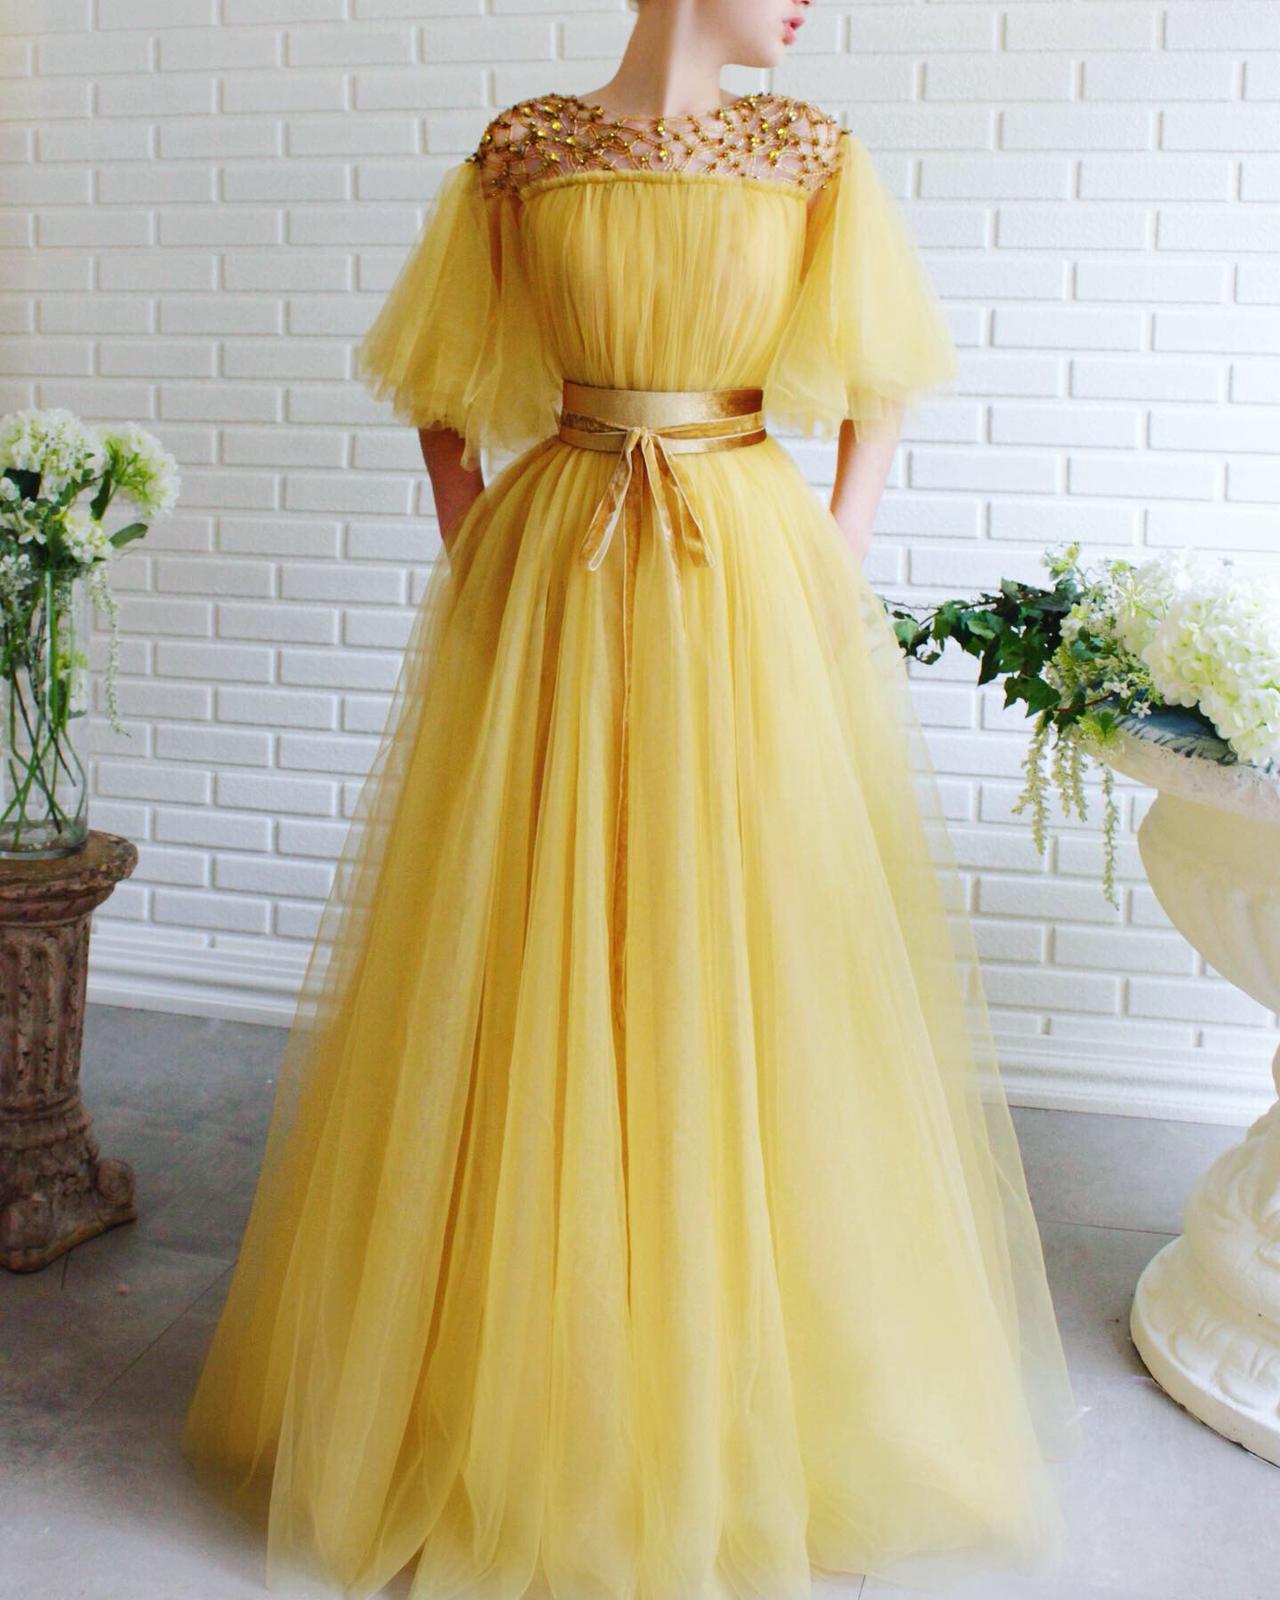 Yellow A-Line dress with short sleeves, belt and embroidery